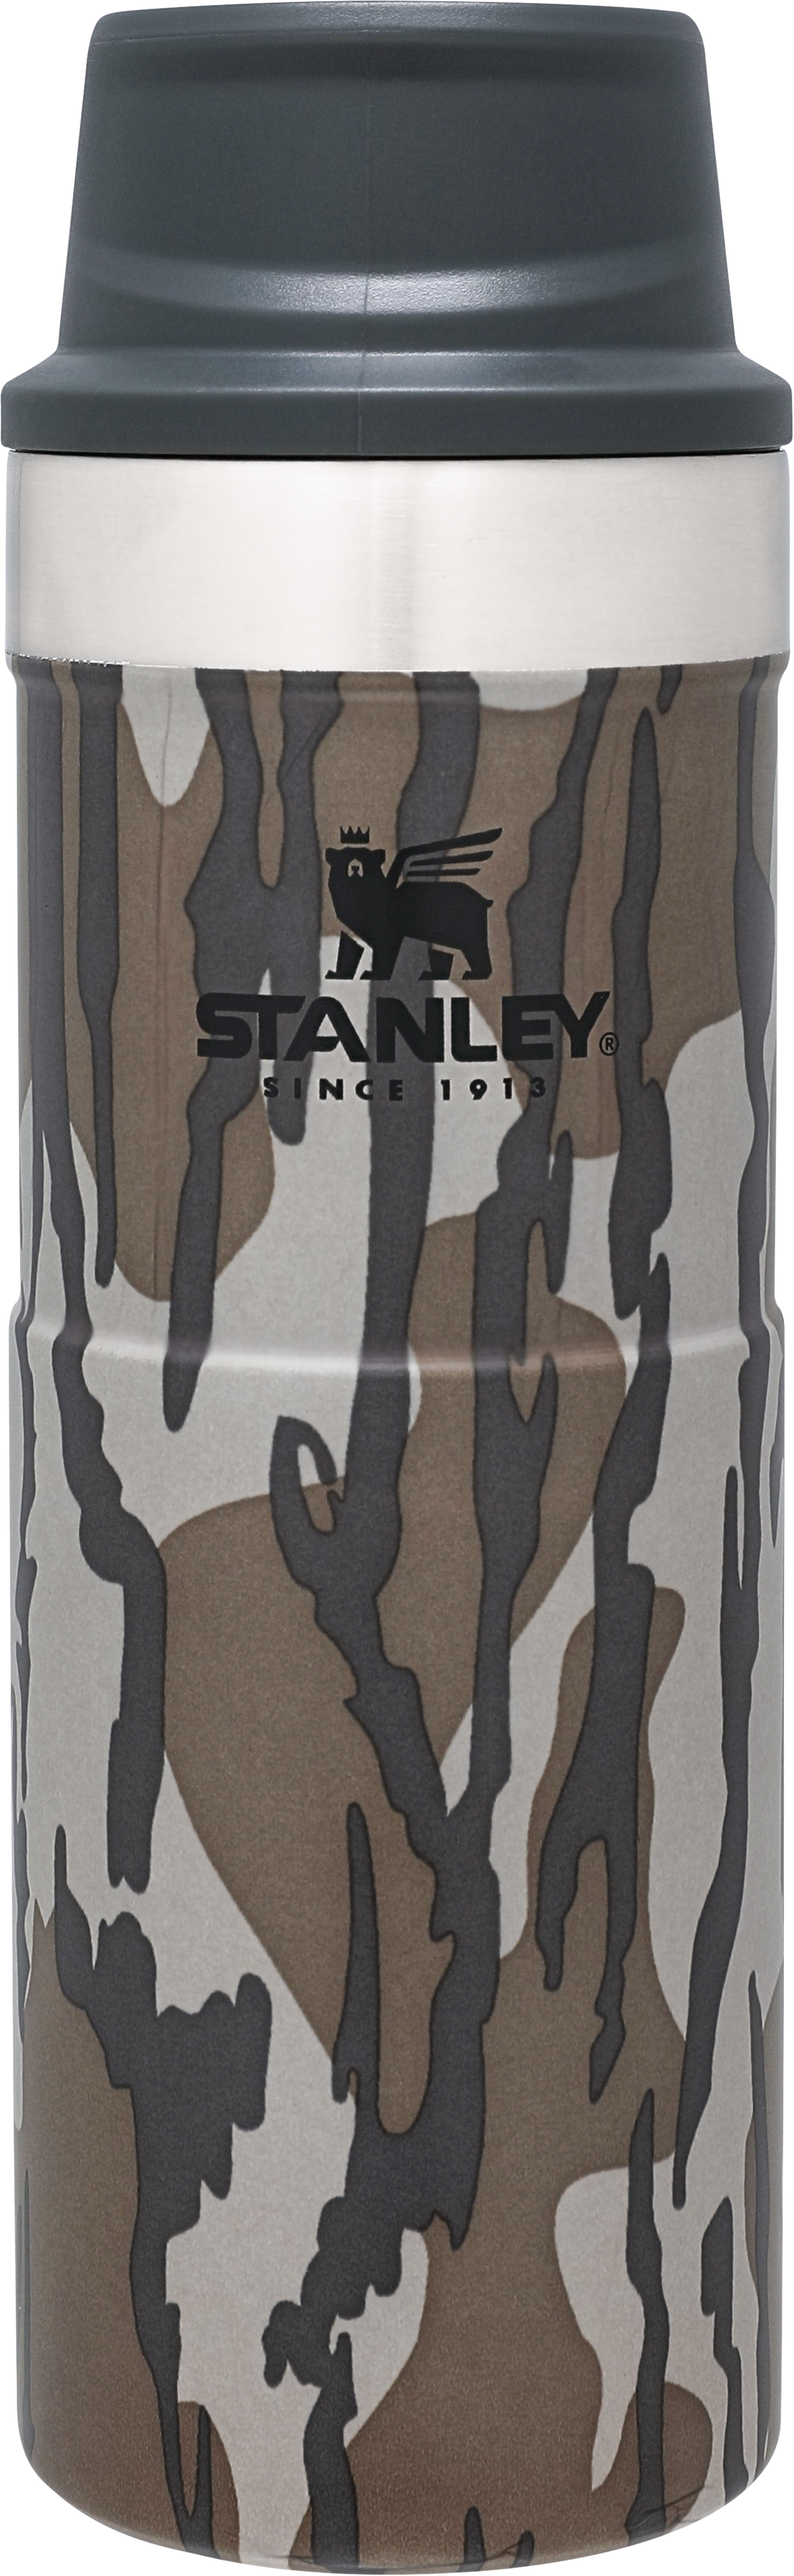 https://image.menswearhouse.com/is/image/TMW/TMW_8XHR_03_STANLEY_GIFTS_BOTTOMLAND_CAMO_MAIN